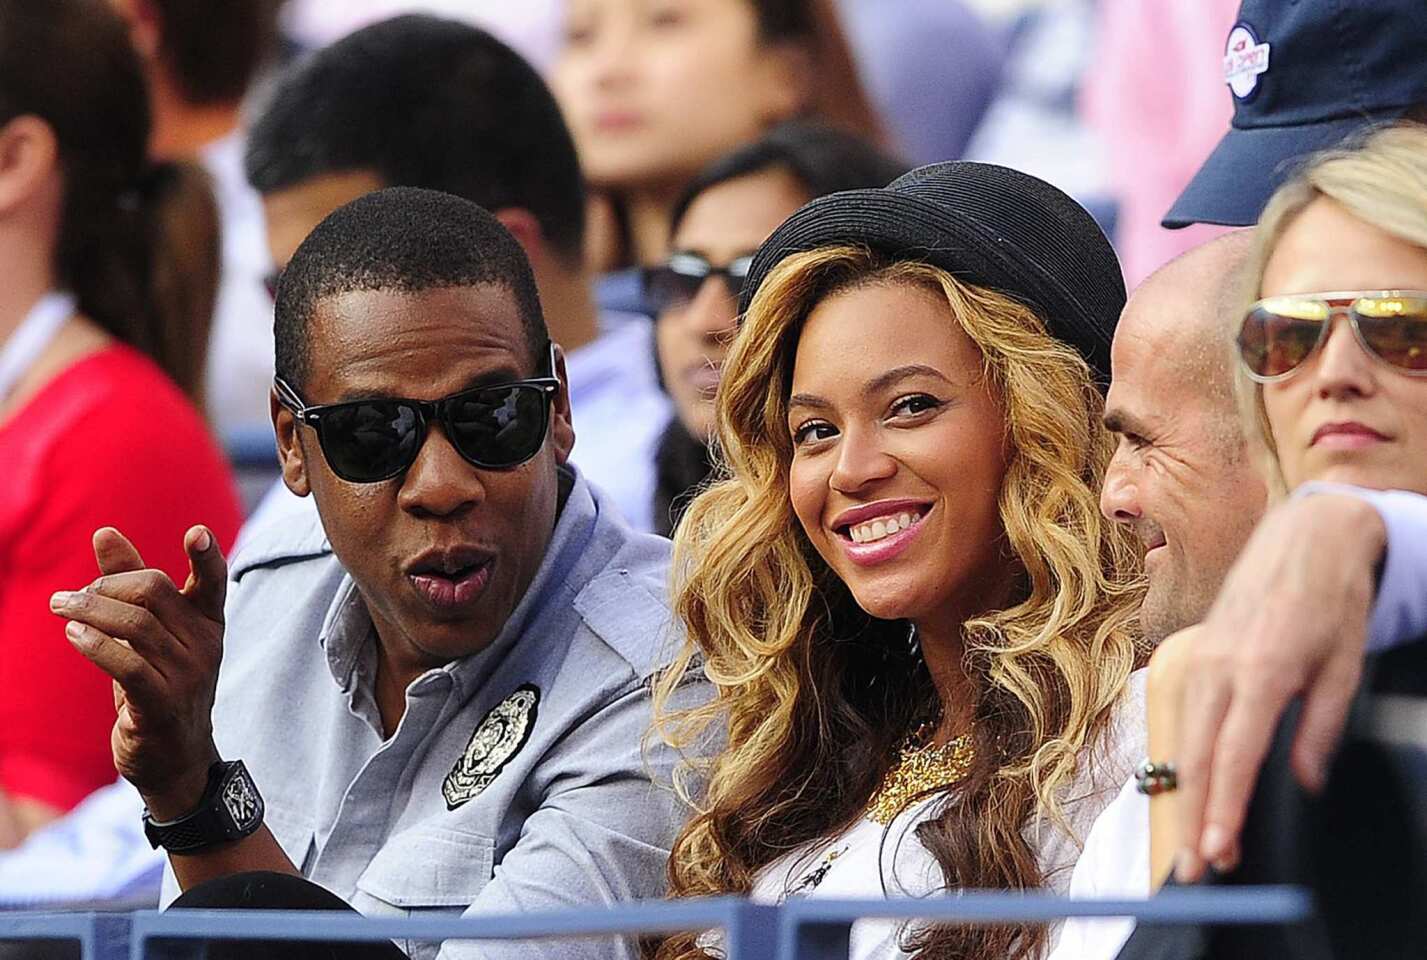 OVERRATED: Jay-Z and Beyoncé's parenthood